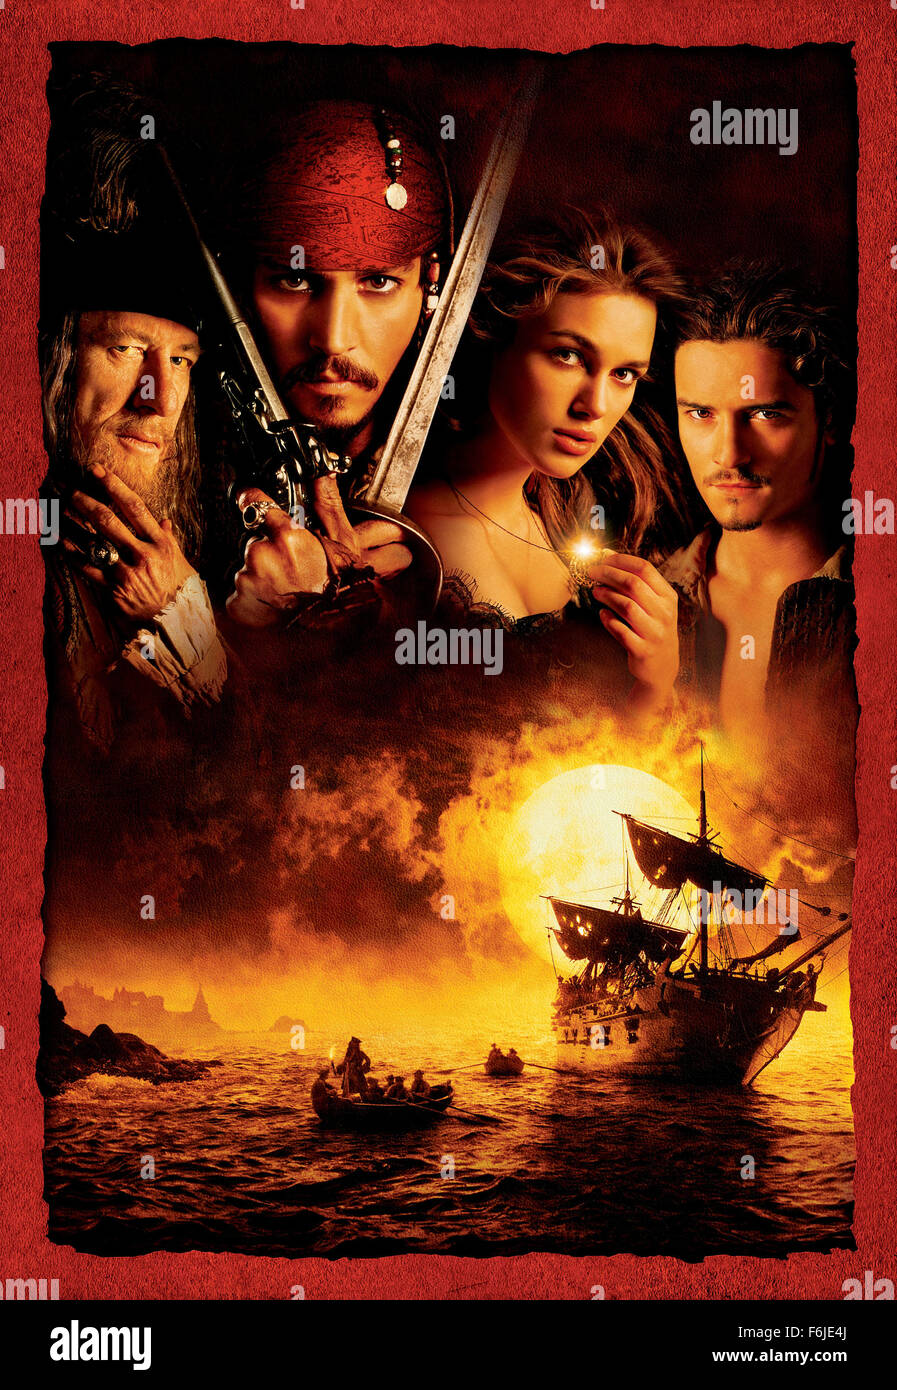 Jun 28, 2003; Los Angeles, CA, USA; (L-R): Actor GEOFFREY RUSH stars as Barbossa, JOHNNY DEPP stars as Jack Sparrow, KEIRA KNIGHTLEY as Elizabeth Swann and ORLANDO BLOOM as Will Turner in the Walt Disney Pictures fantasy/adventure move, 'Pirates of the Caribbean.' Stock Photo